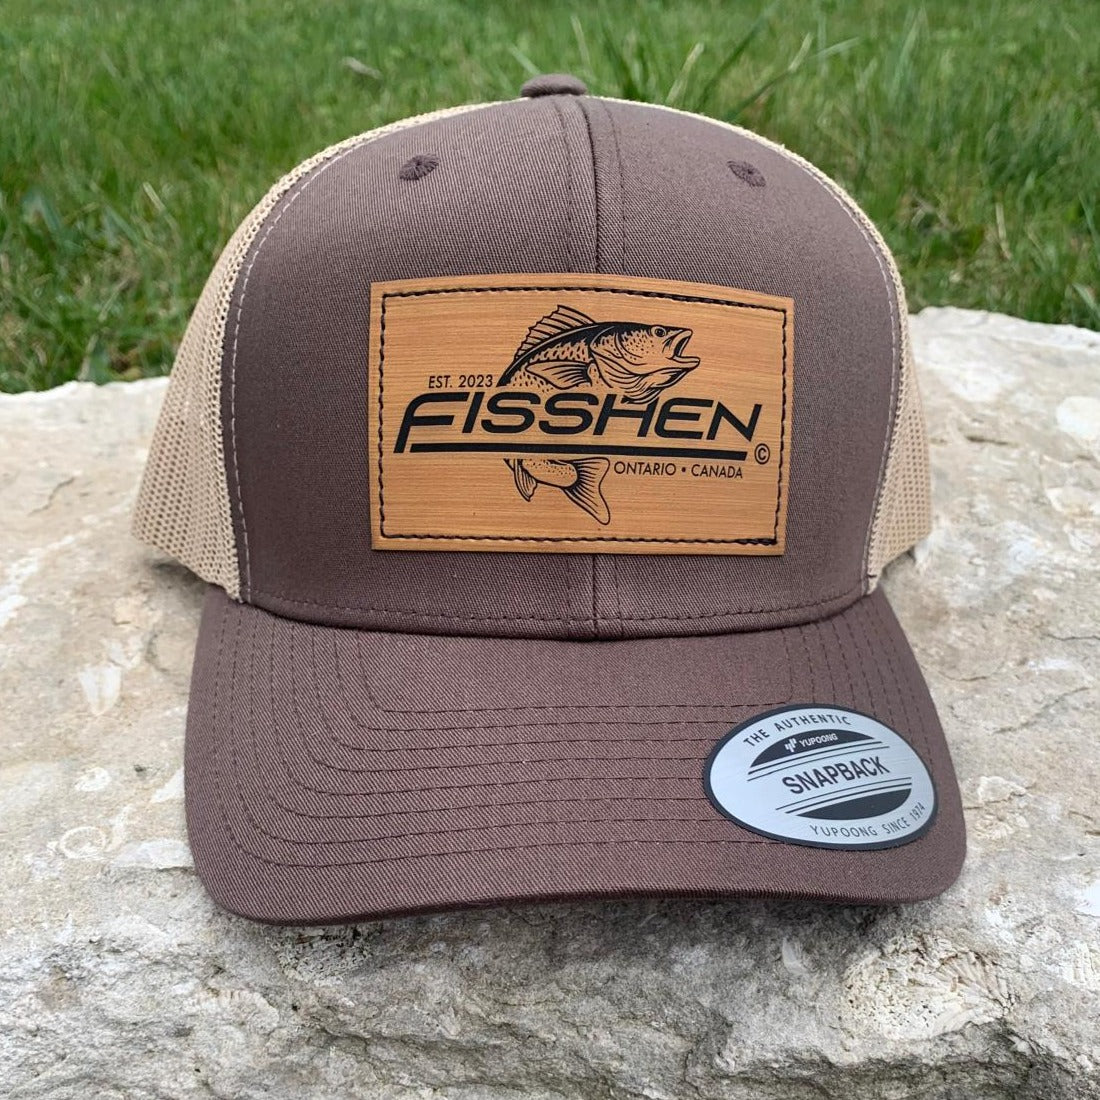 Fishing design with the word Fisshen. Trout image on bamboo patch. Hat is Brown with a taupe back